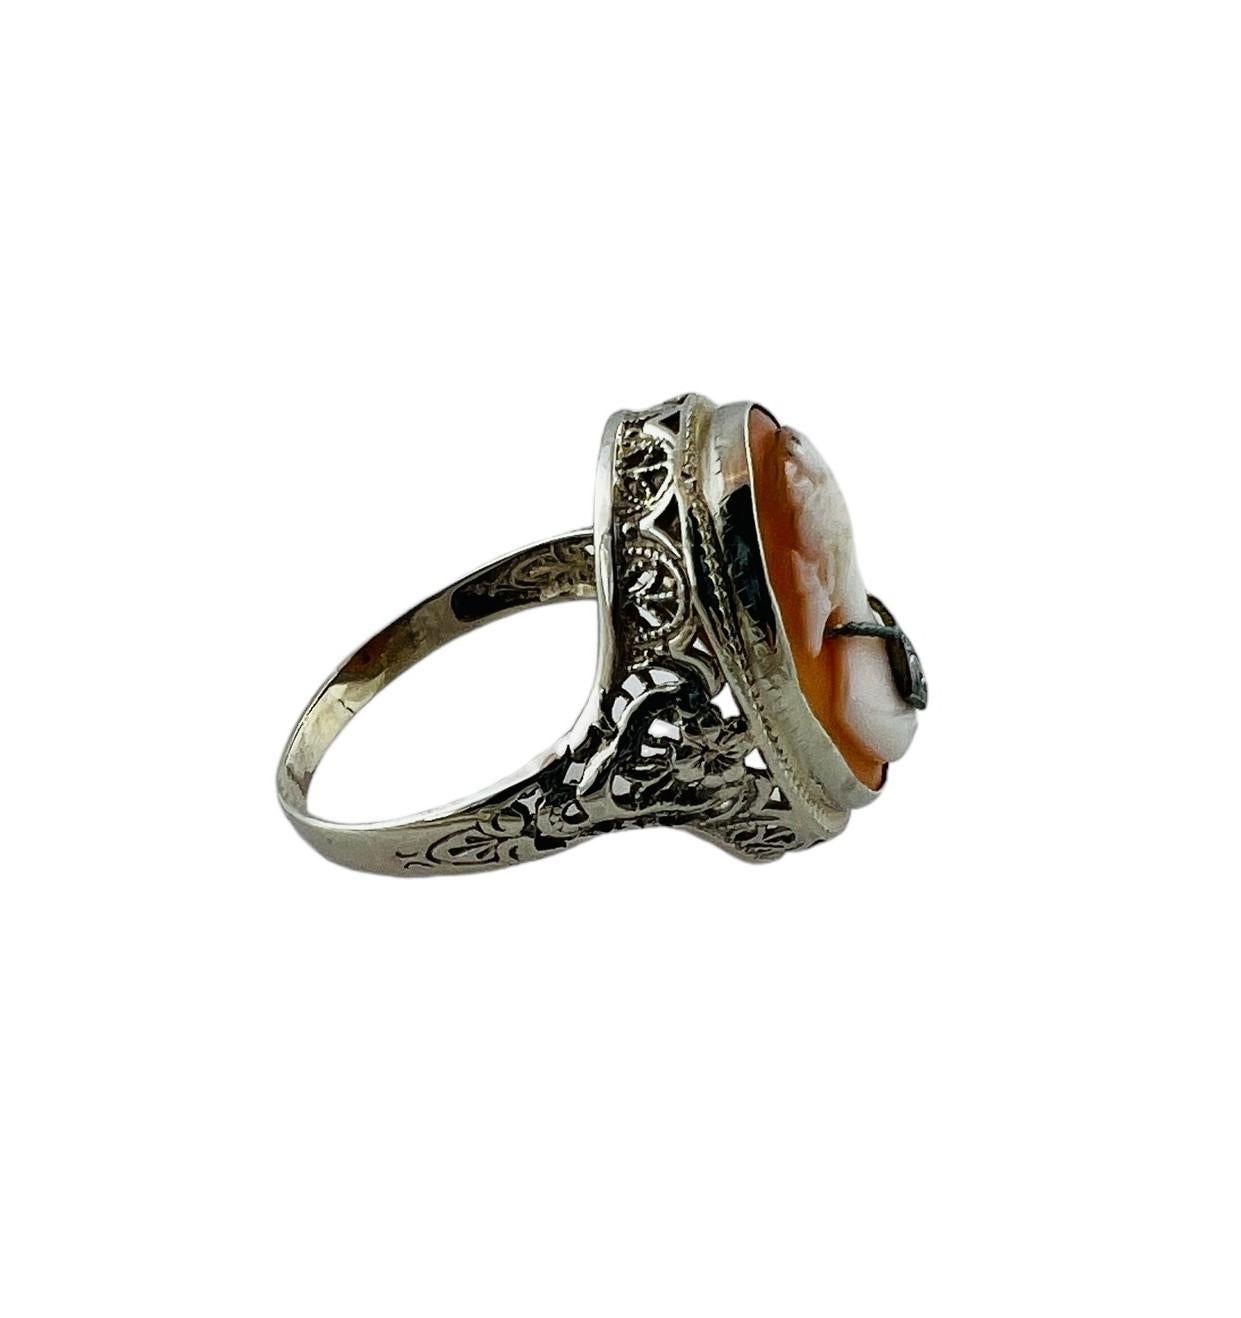 Single Cut 14K White Gold Cameo Filigree Ring with Diamond #16682 For Sale